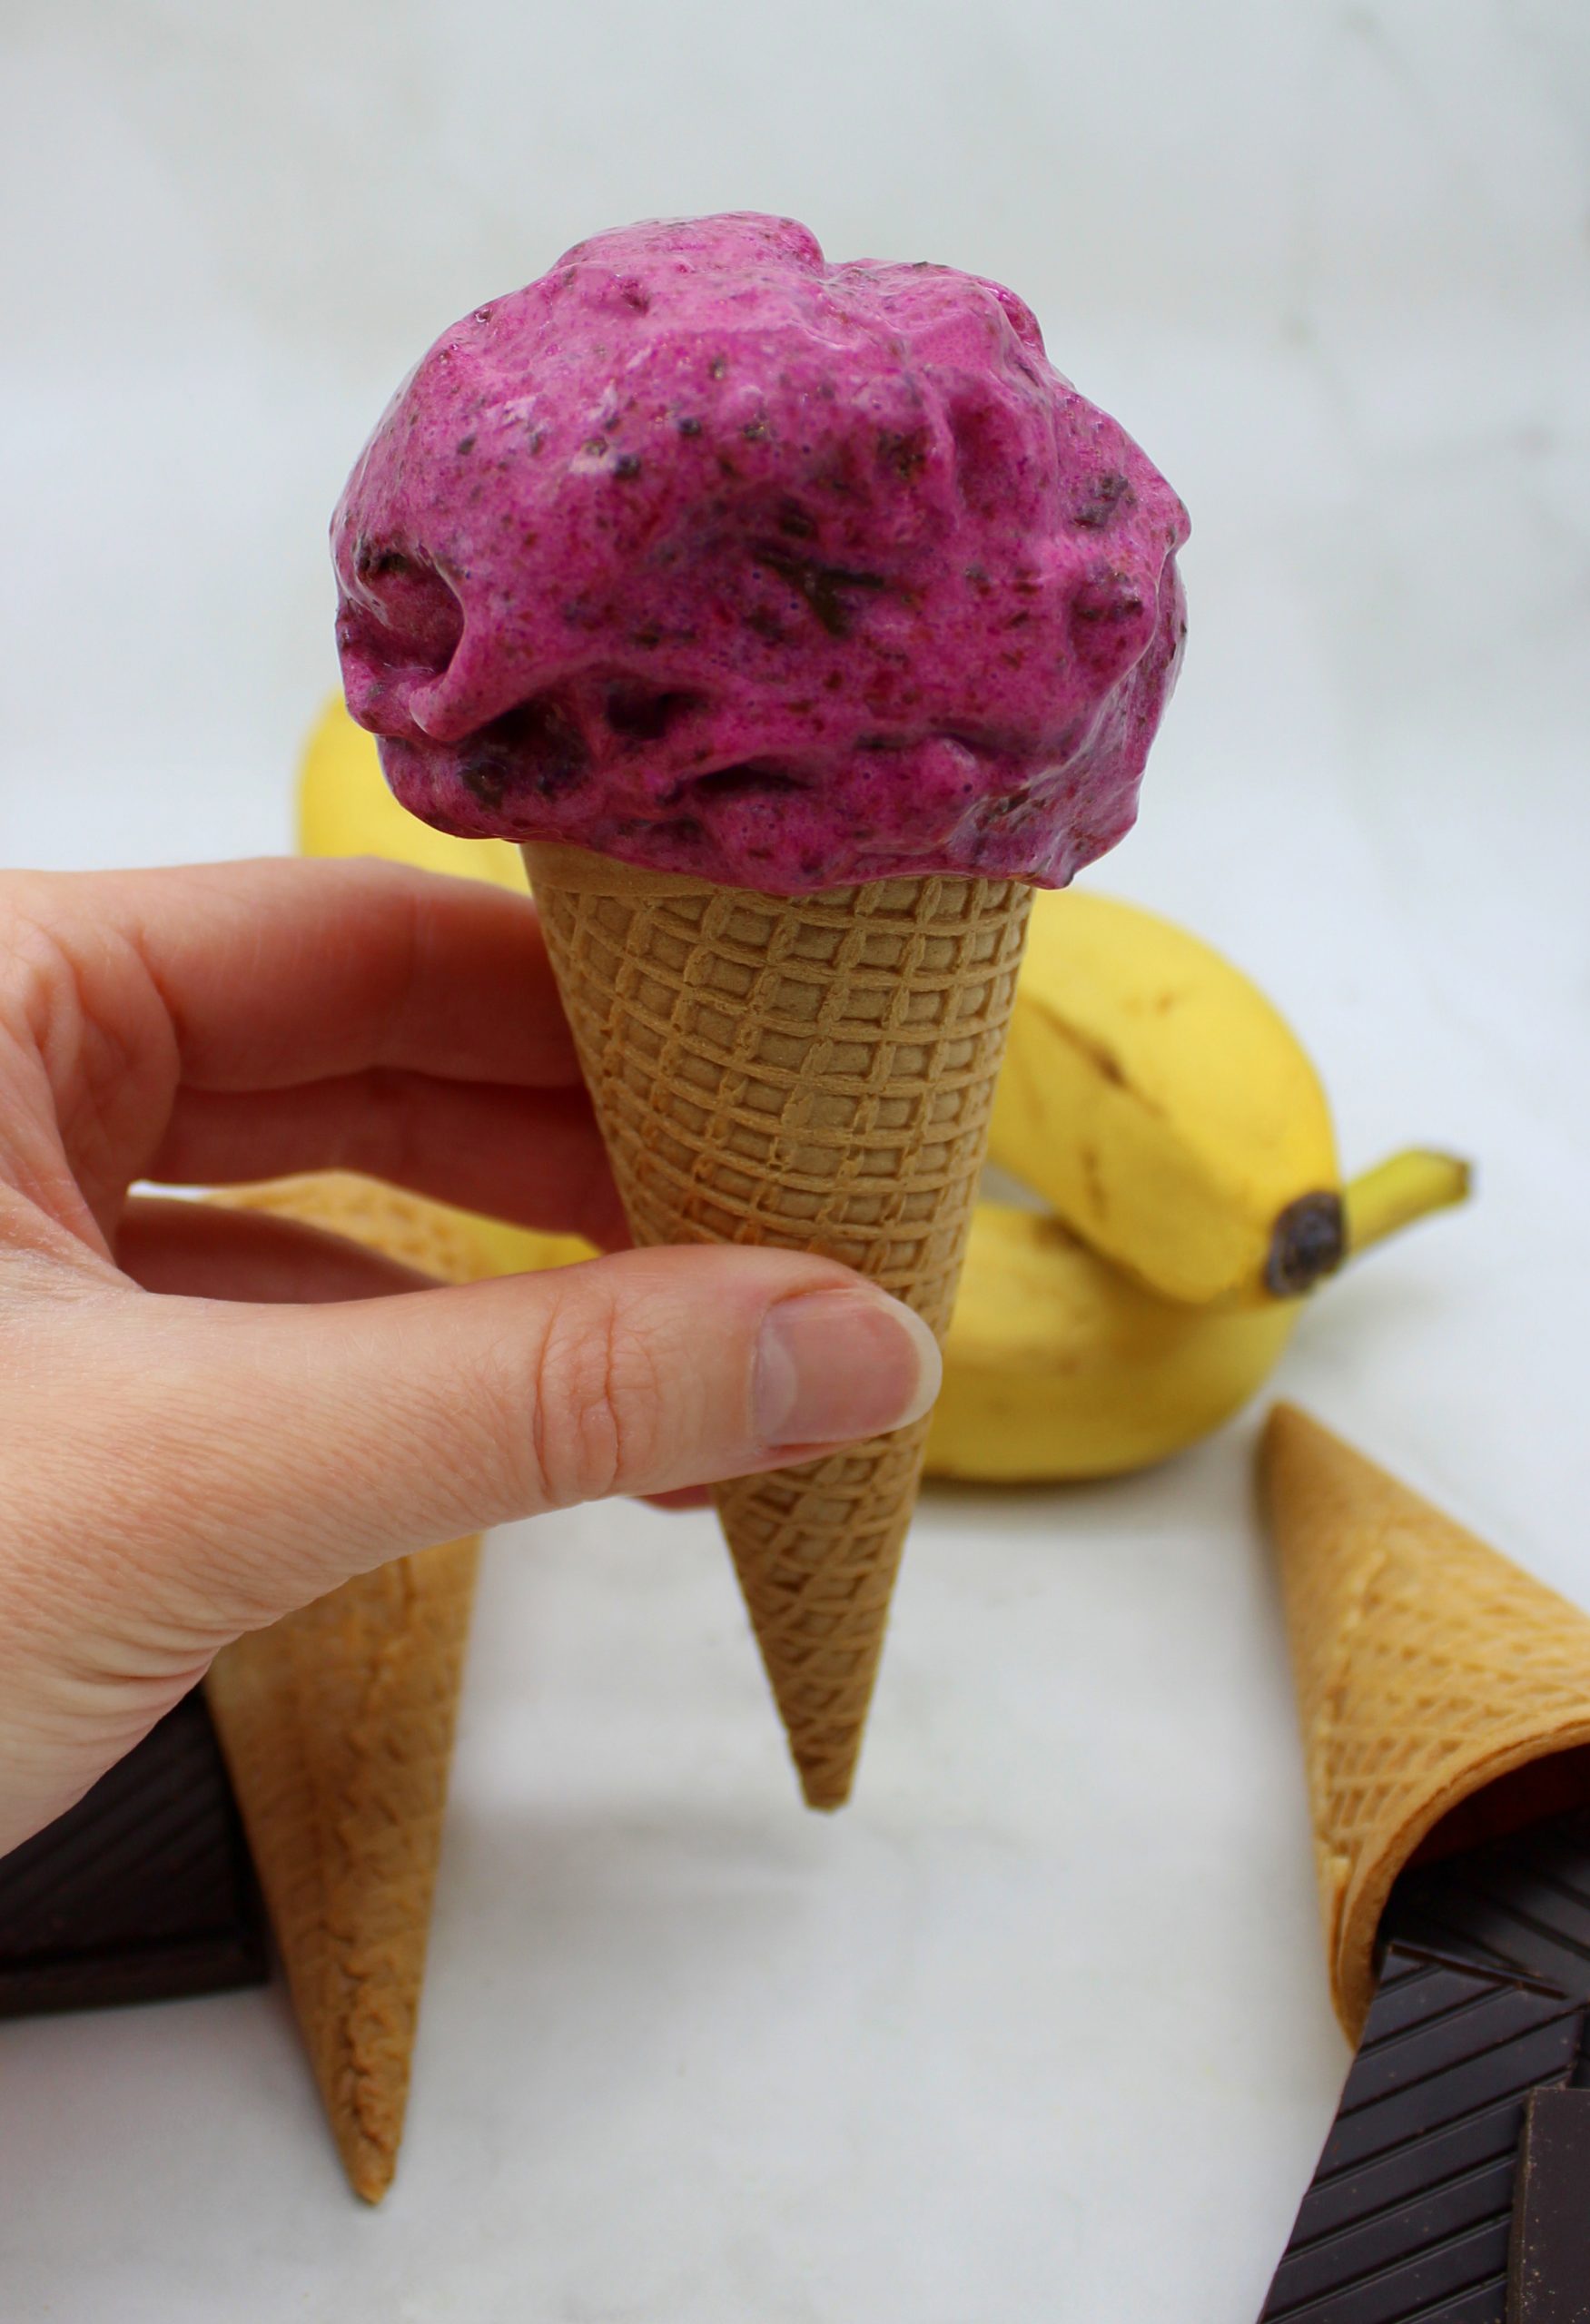 Vegan beetroot ice cream with chocolate pieces in a cone